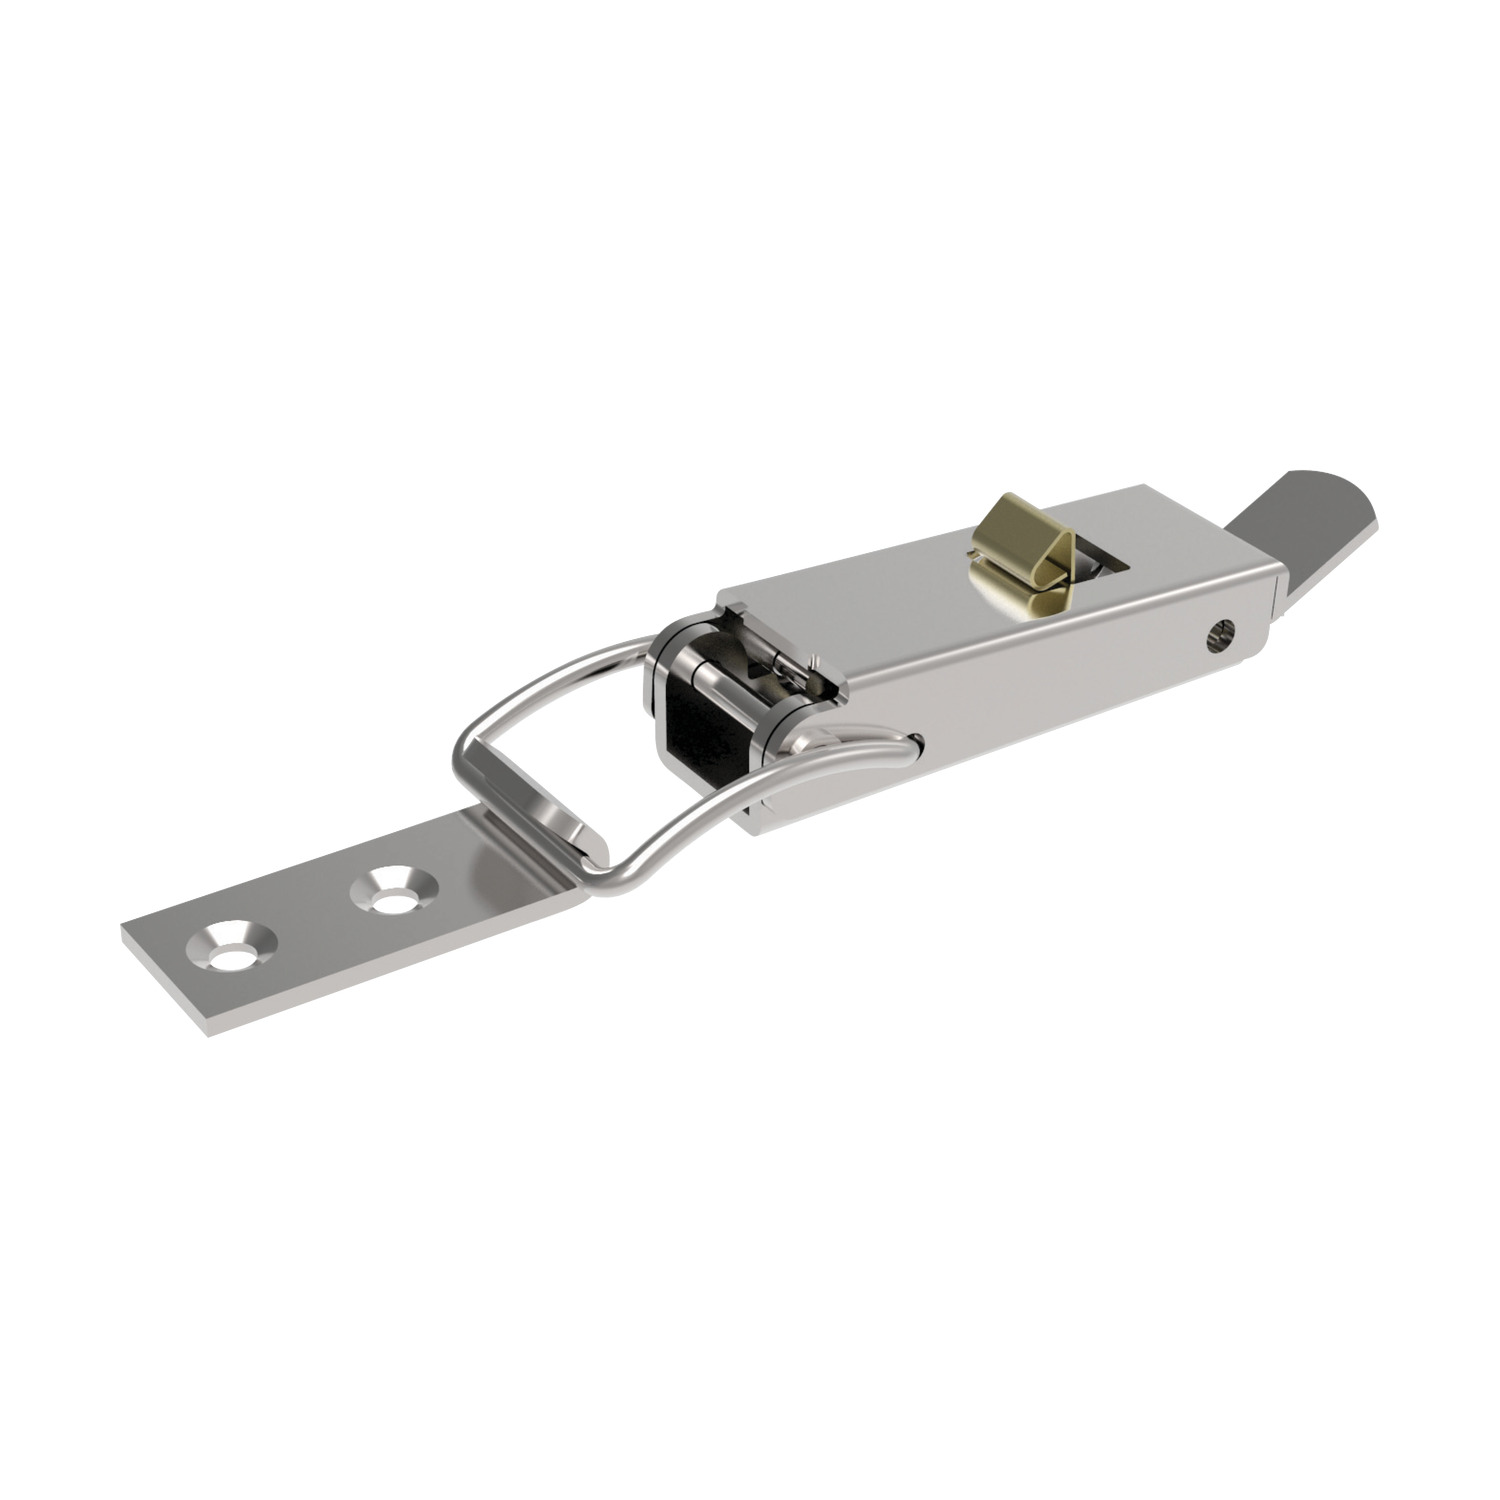 J0462.AC0004 Toggle Latches Zinc Plated Steel - 102 - 11 - 23